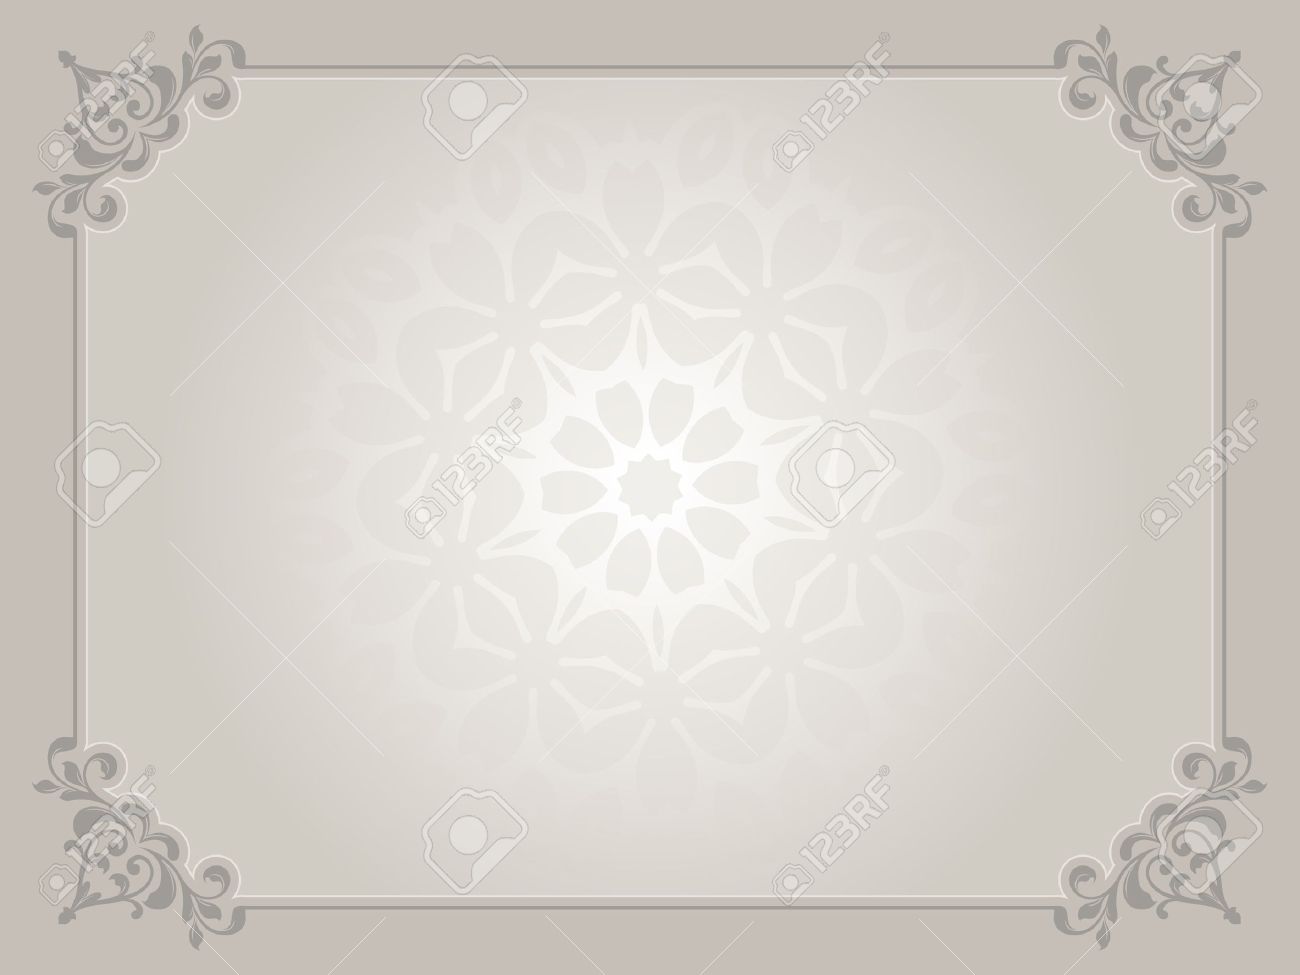 Decorative Certificate Background With Watermark In Centre Stock